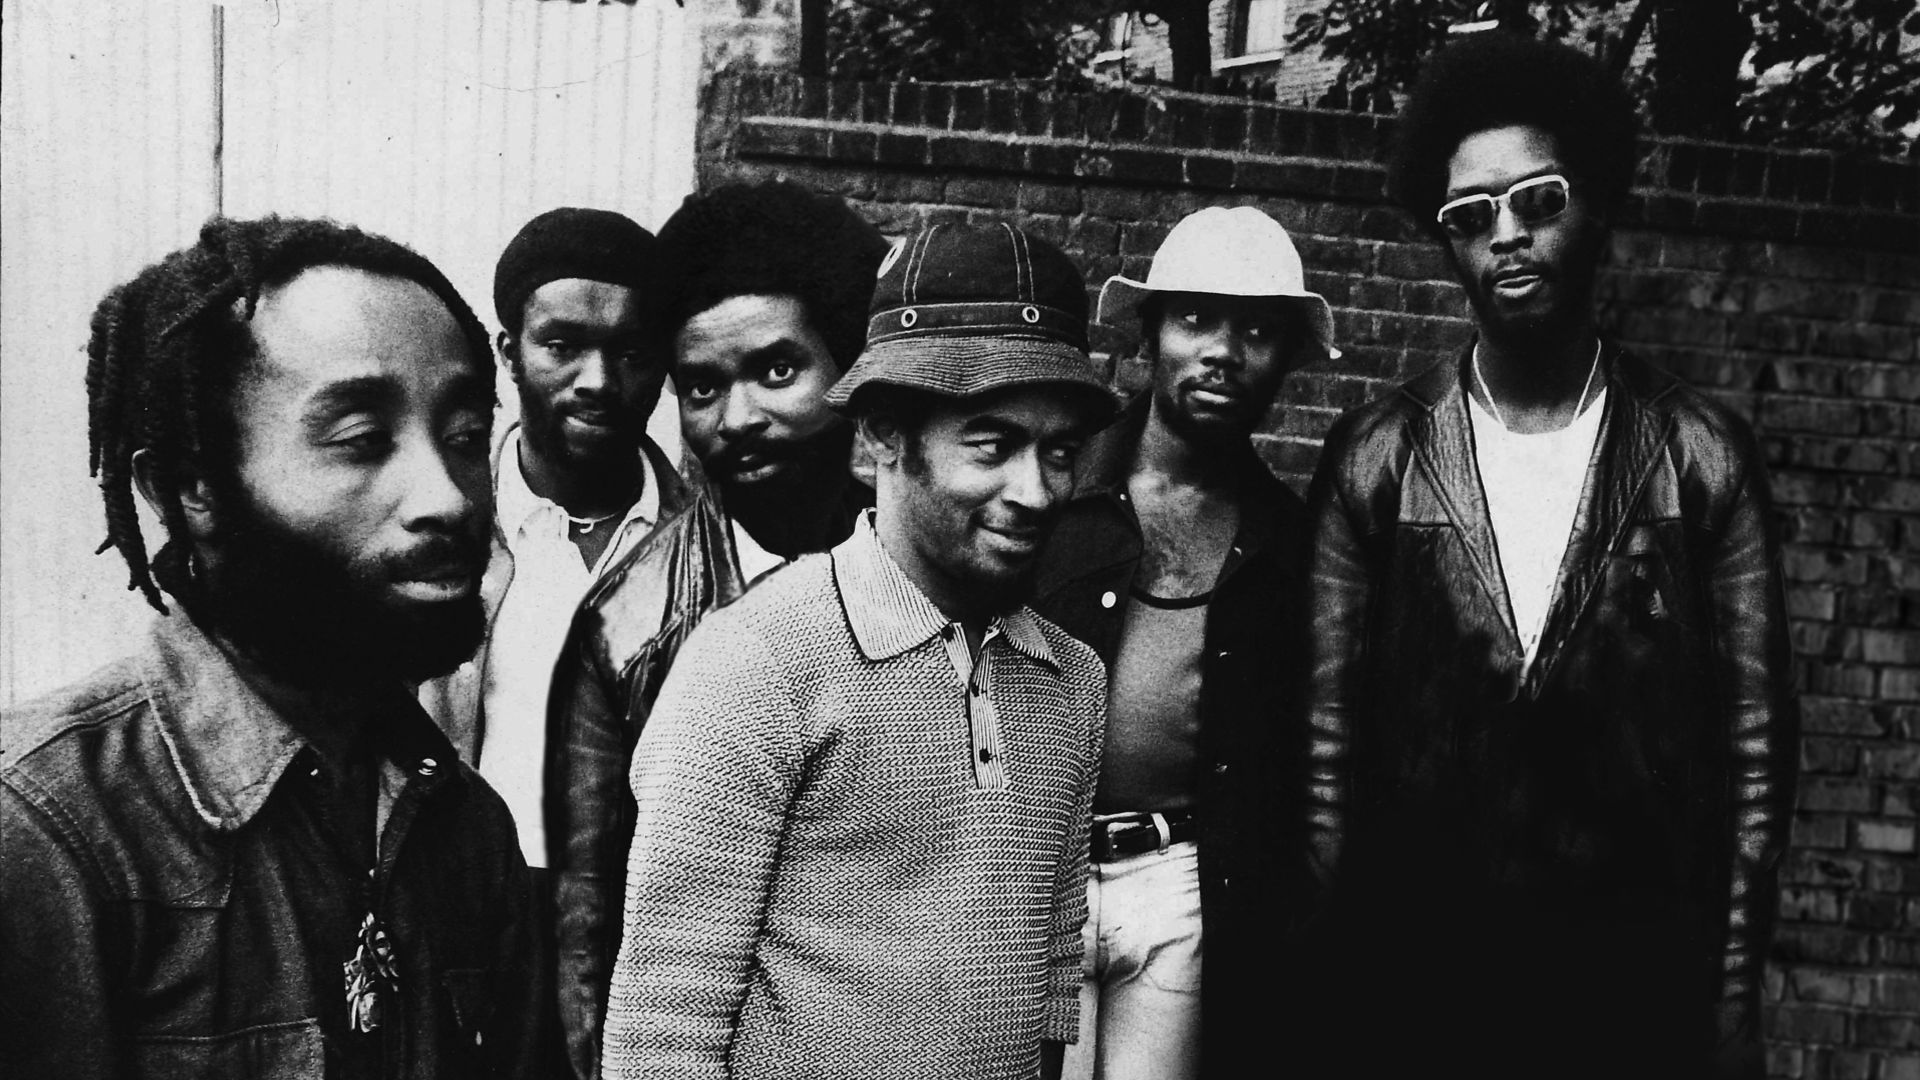 Cymande in the early 1970s, left to right, Pablo Gonsales, Patrick Patterson, Derrick Gibbs, Mike ‘Bami’ Rose, Steve Scipio and Sam Kelly. Photo: Partisan Records